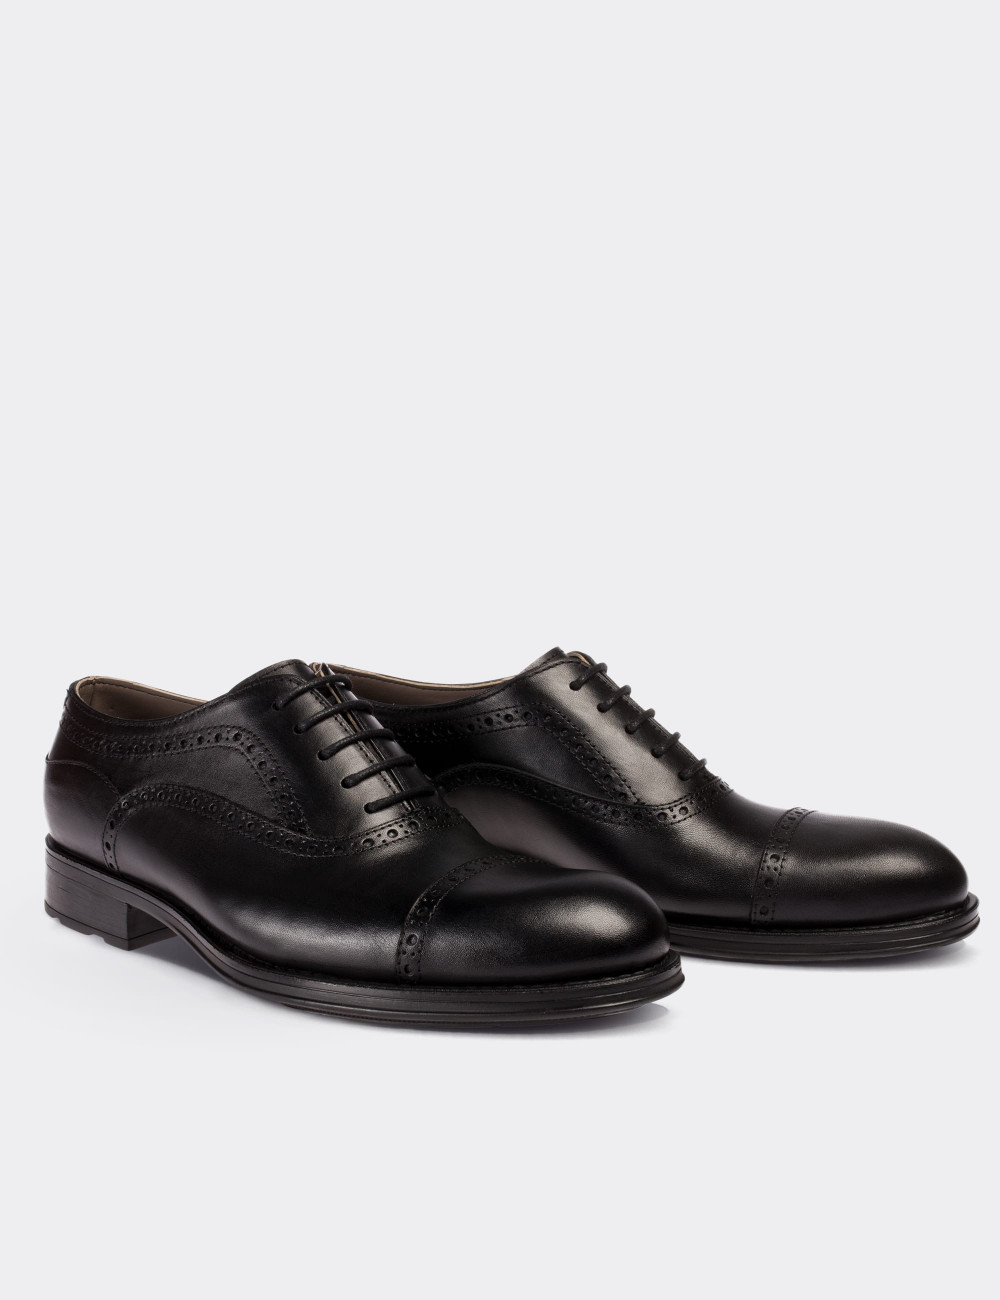 Black  Leather Classic Shoes - 01758MSYHC01